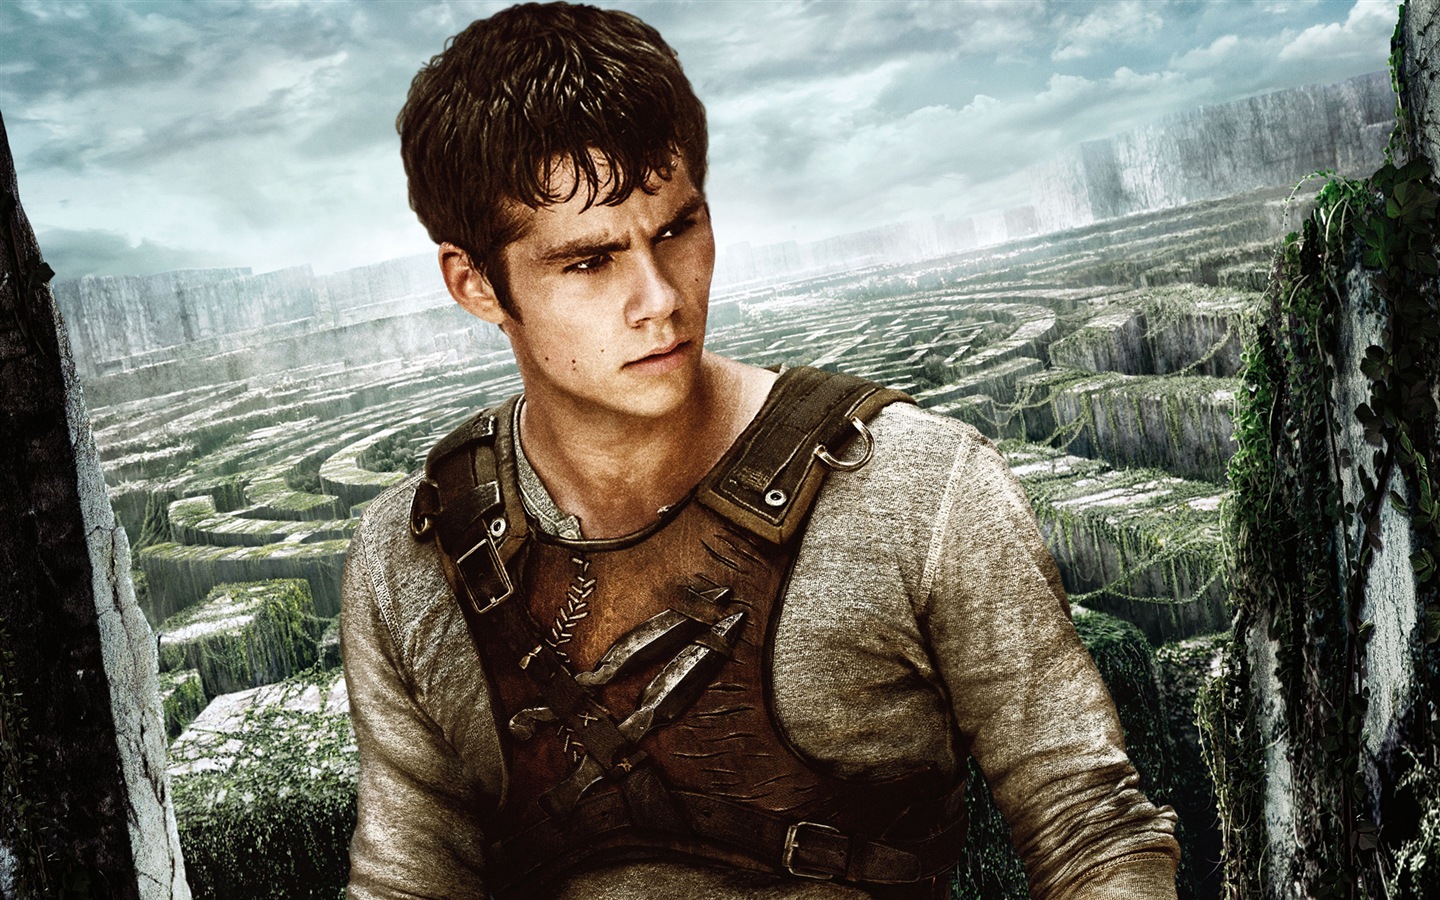 The Maze Runner HD movie wallpapers #7 - 1440x900